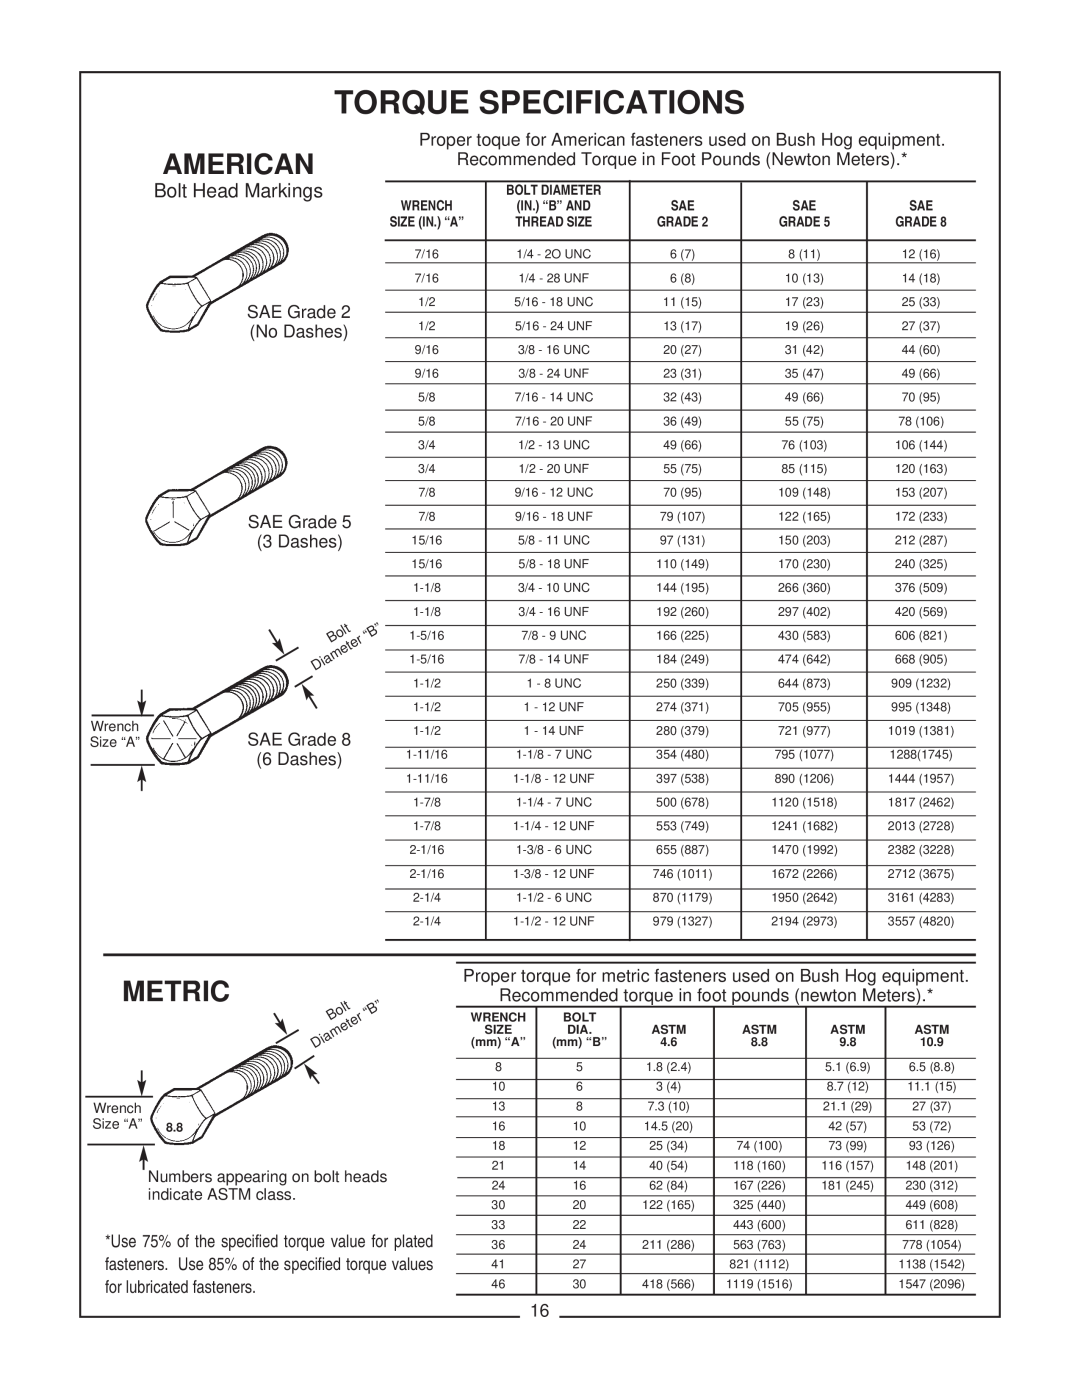 Bush Hog ATH 900 Torque Specifications, American, Metric, Numbers appearing on bolt heads indicate ASTM class, Wrench 